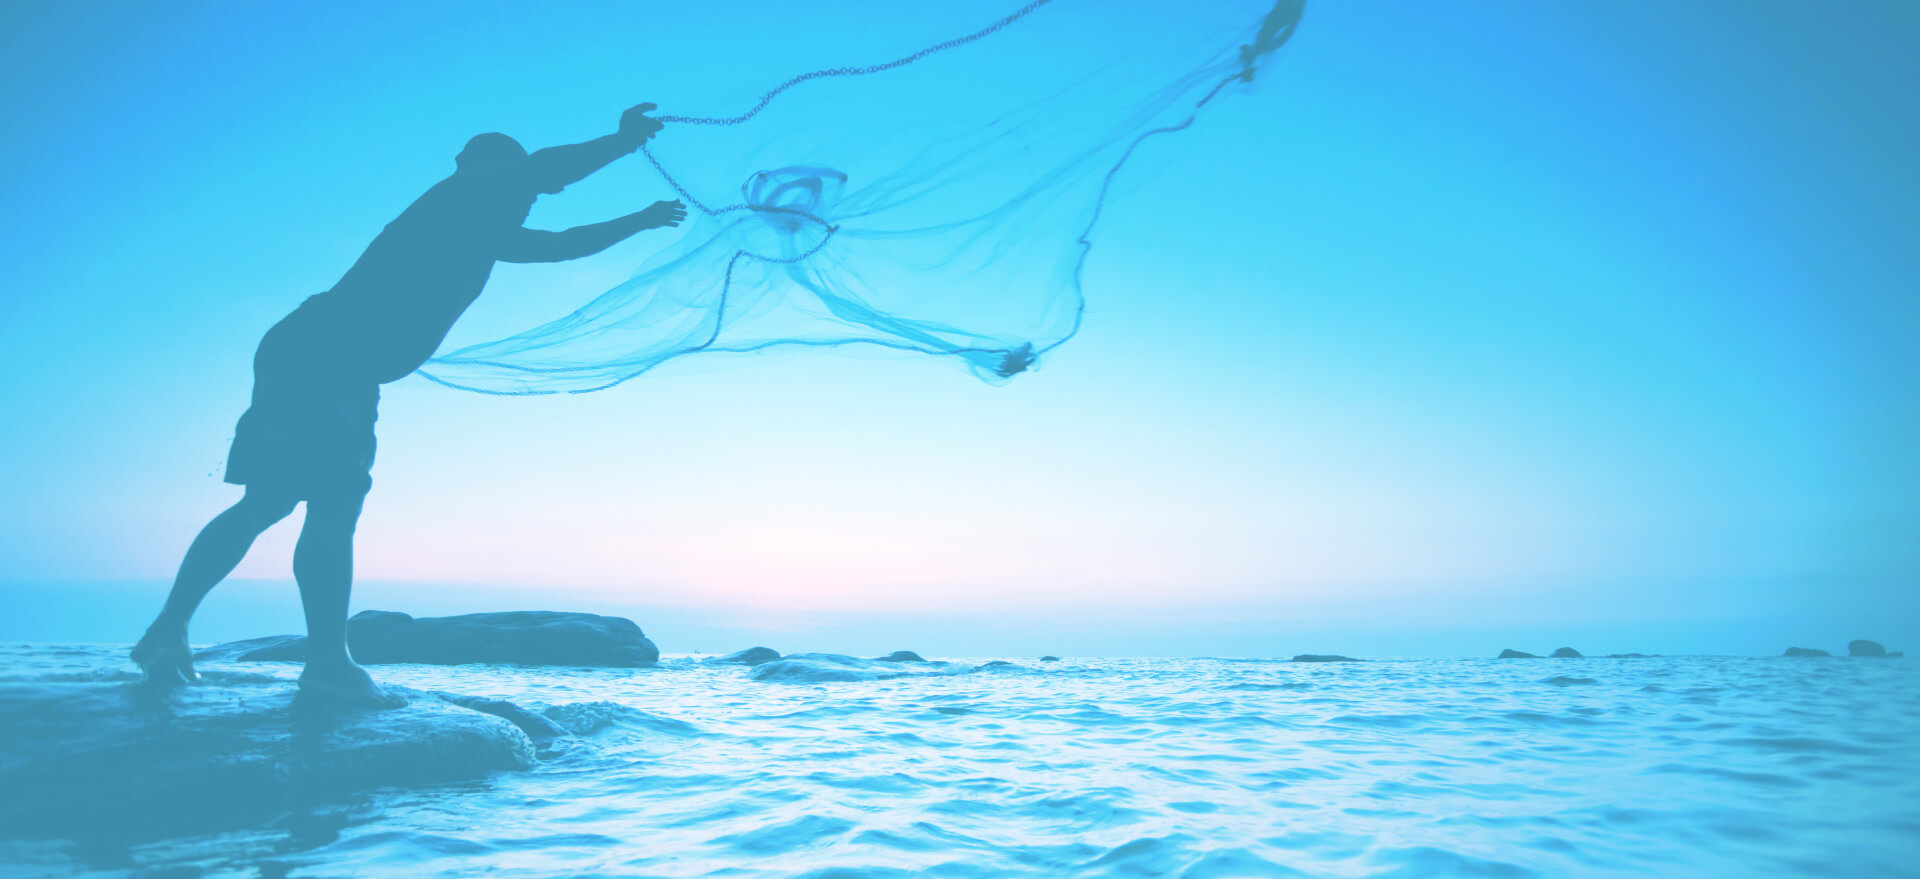 person standing on a rock casting a fishing net over rippled ocean